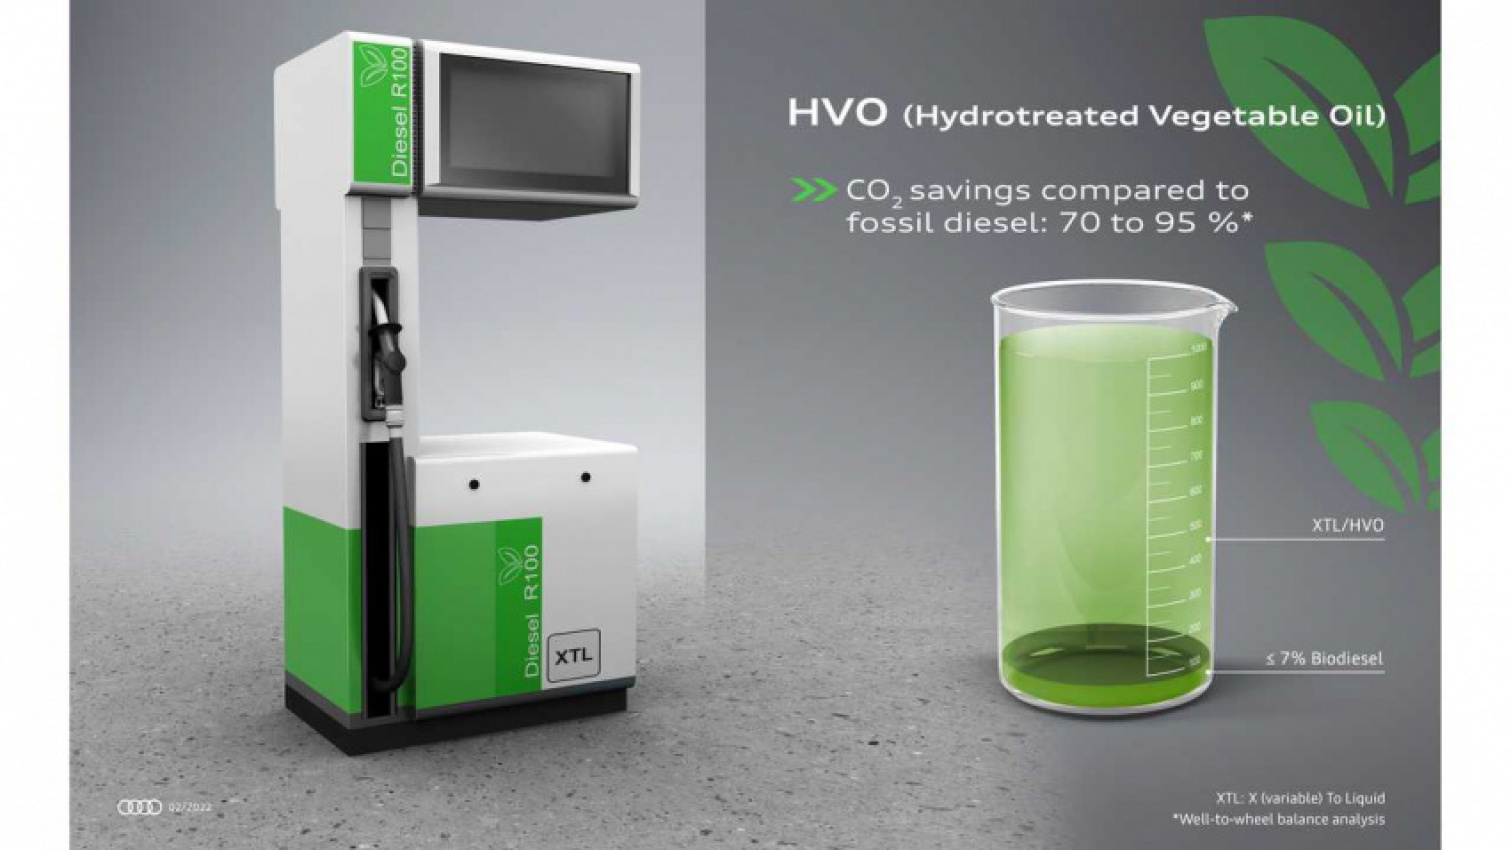 audi, autos, cars, audi v6 diesel engines can now run on hydrotreated vegetable oil